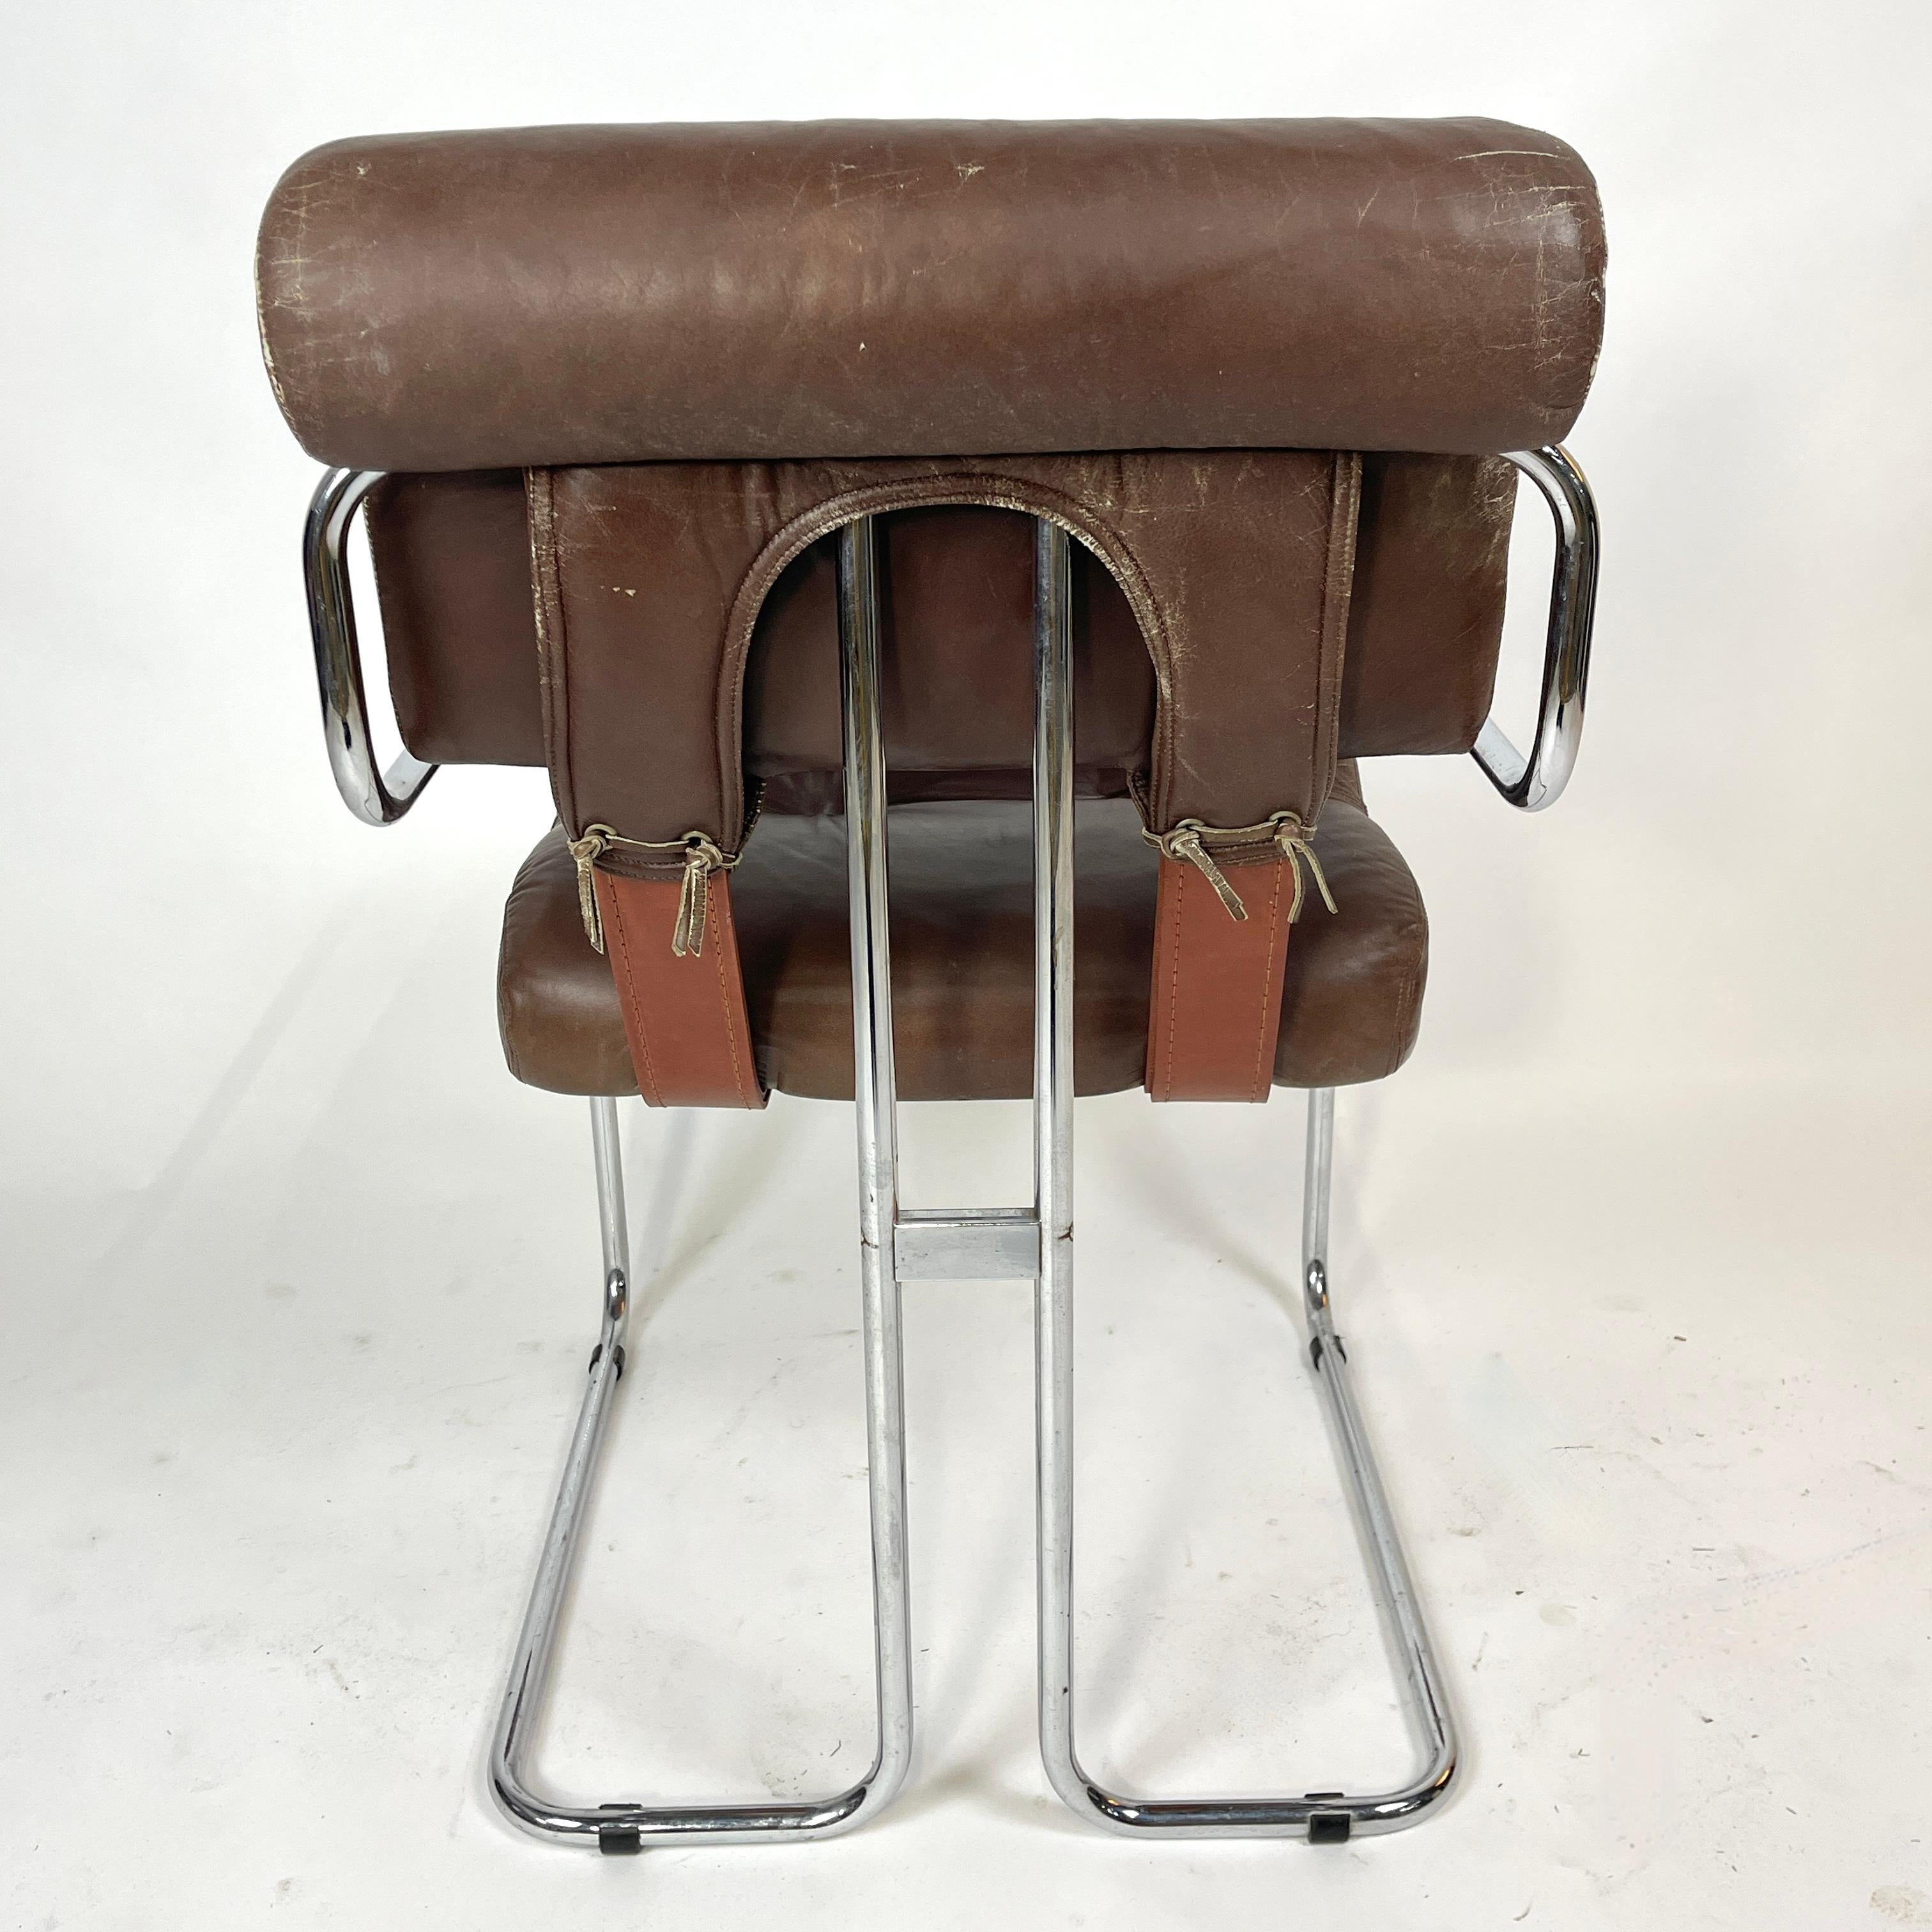 Polished Pace Guido Faleschini 'Tucroma' Sculptural Leather & Chrome Chair Postmodern